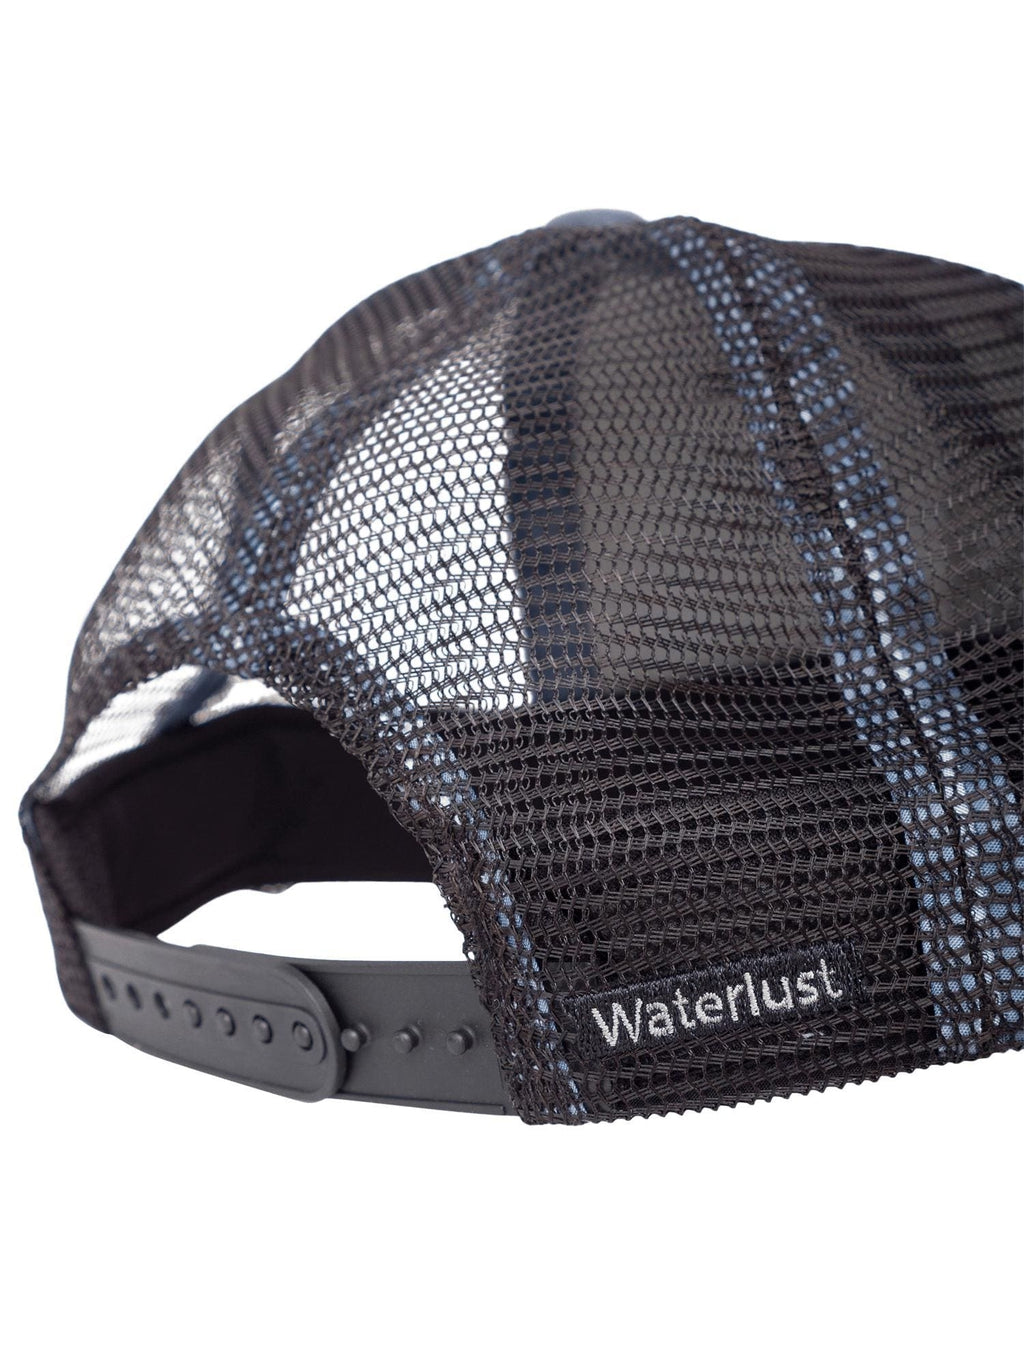 Close up view of the waterlust name embroidered on the back of a black mesh tiger shark printed trucker cap hat